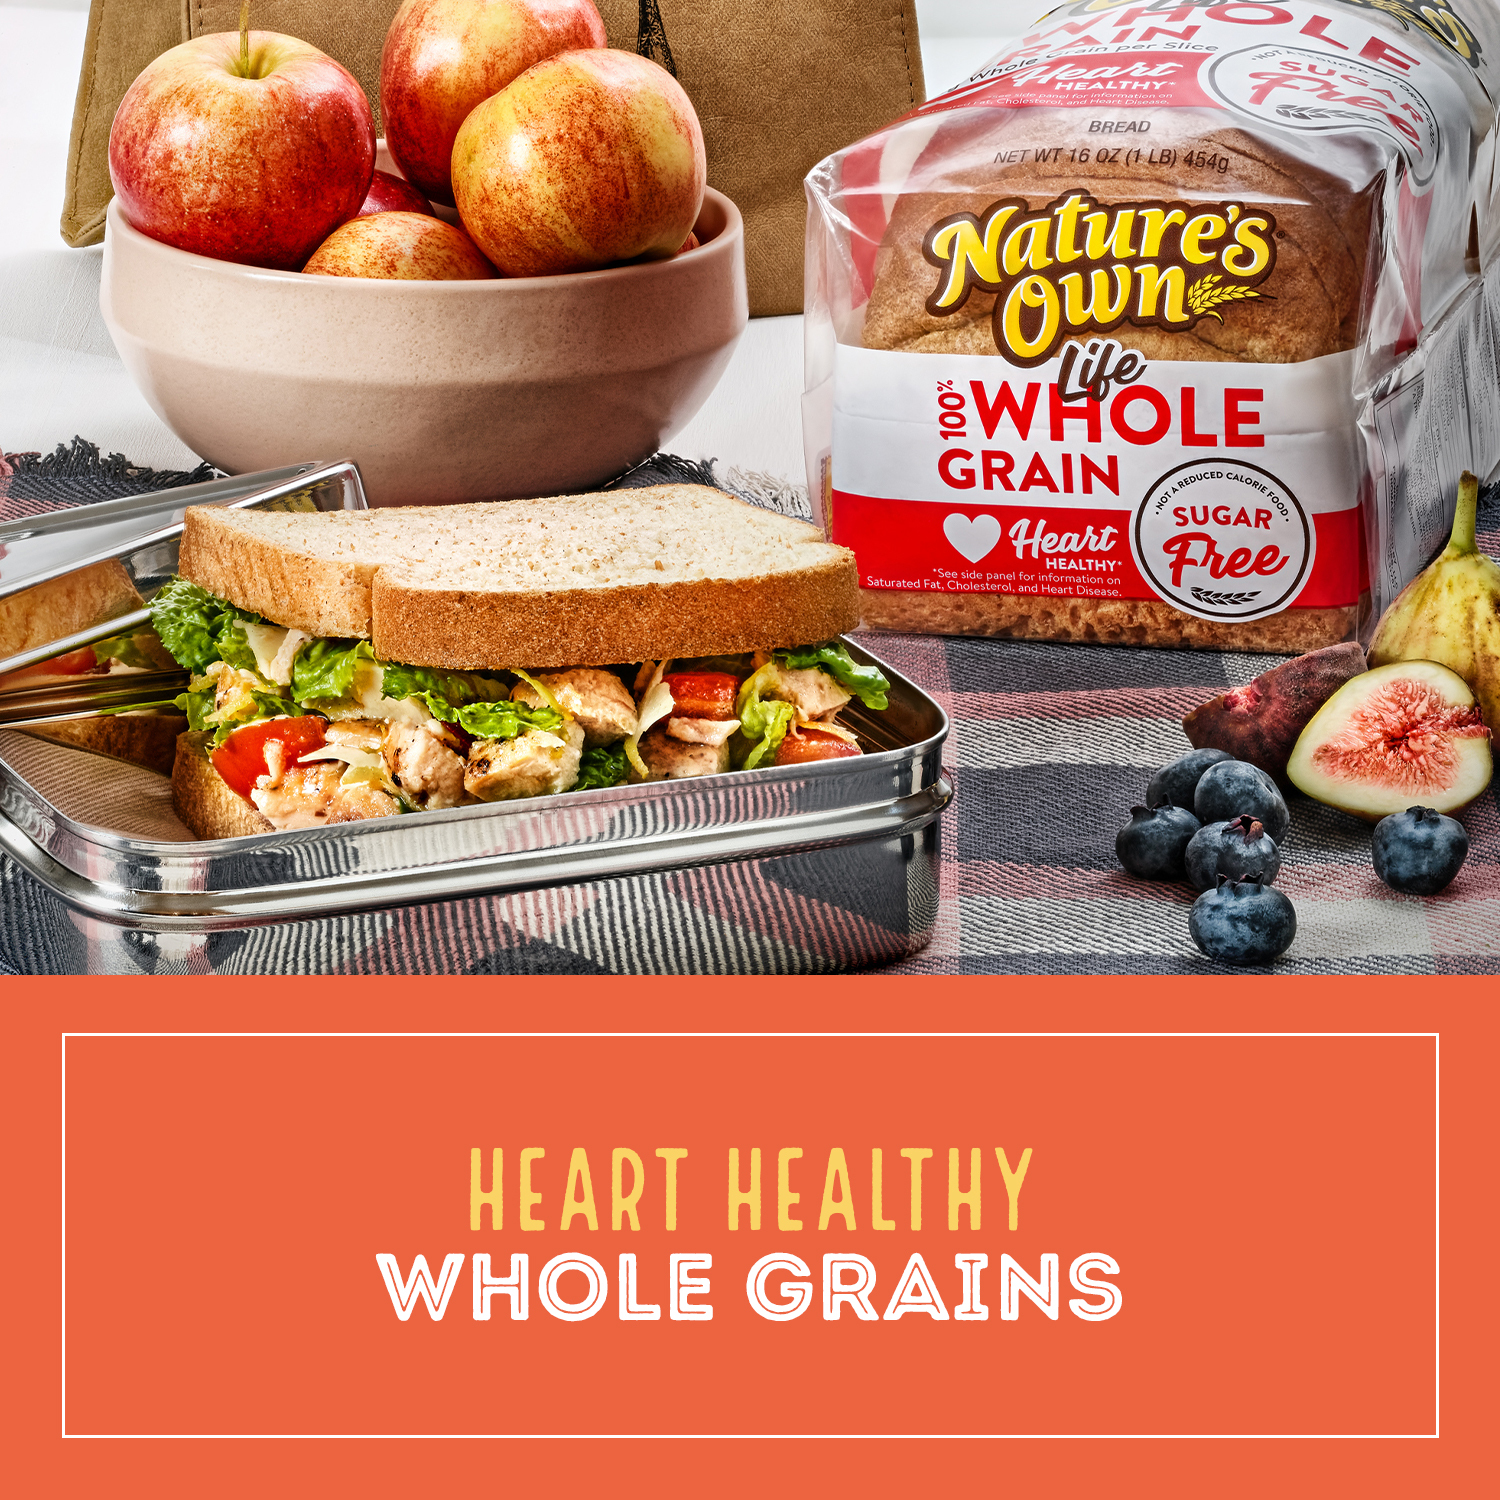 Nature's Own Life Sugar-Free 100% Whole Grain Bread Loaf, 16 oz - image 3 of 15